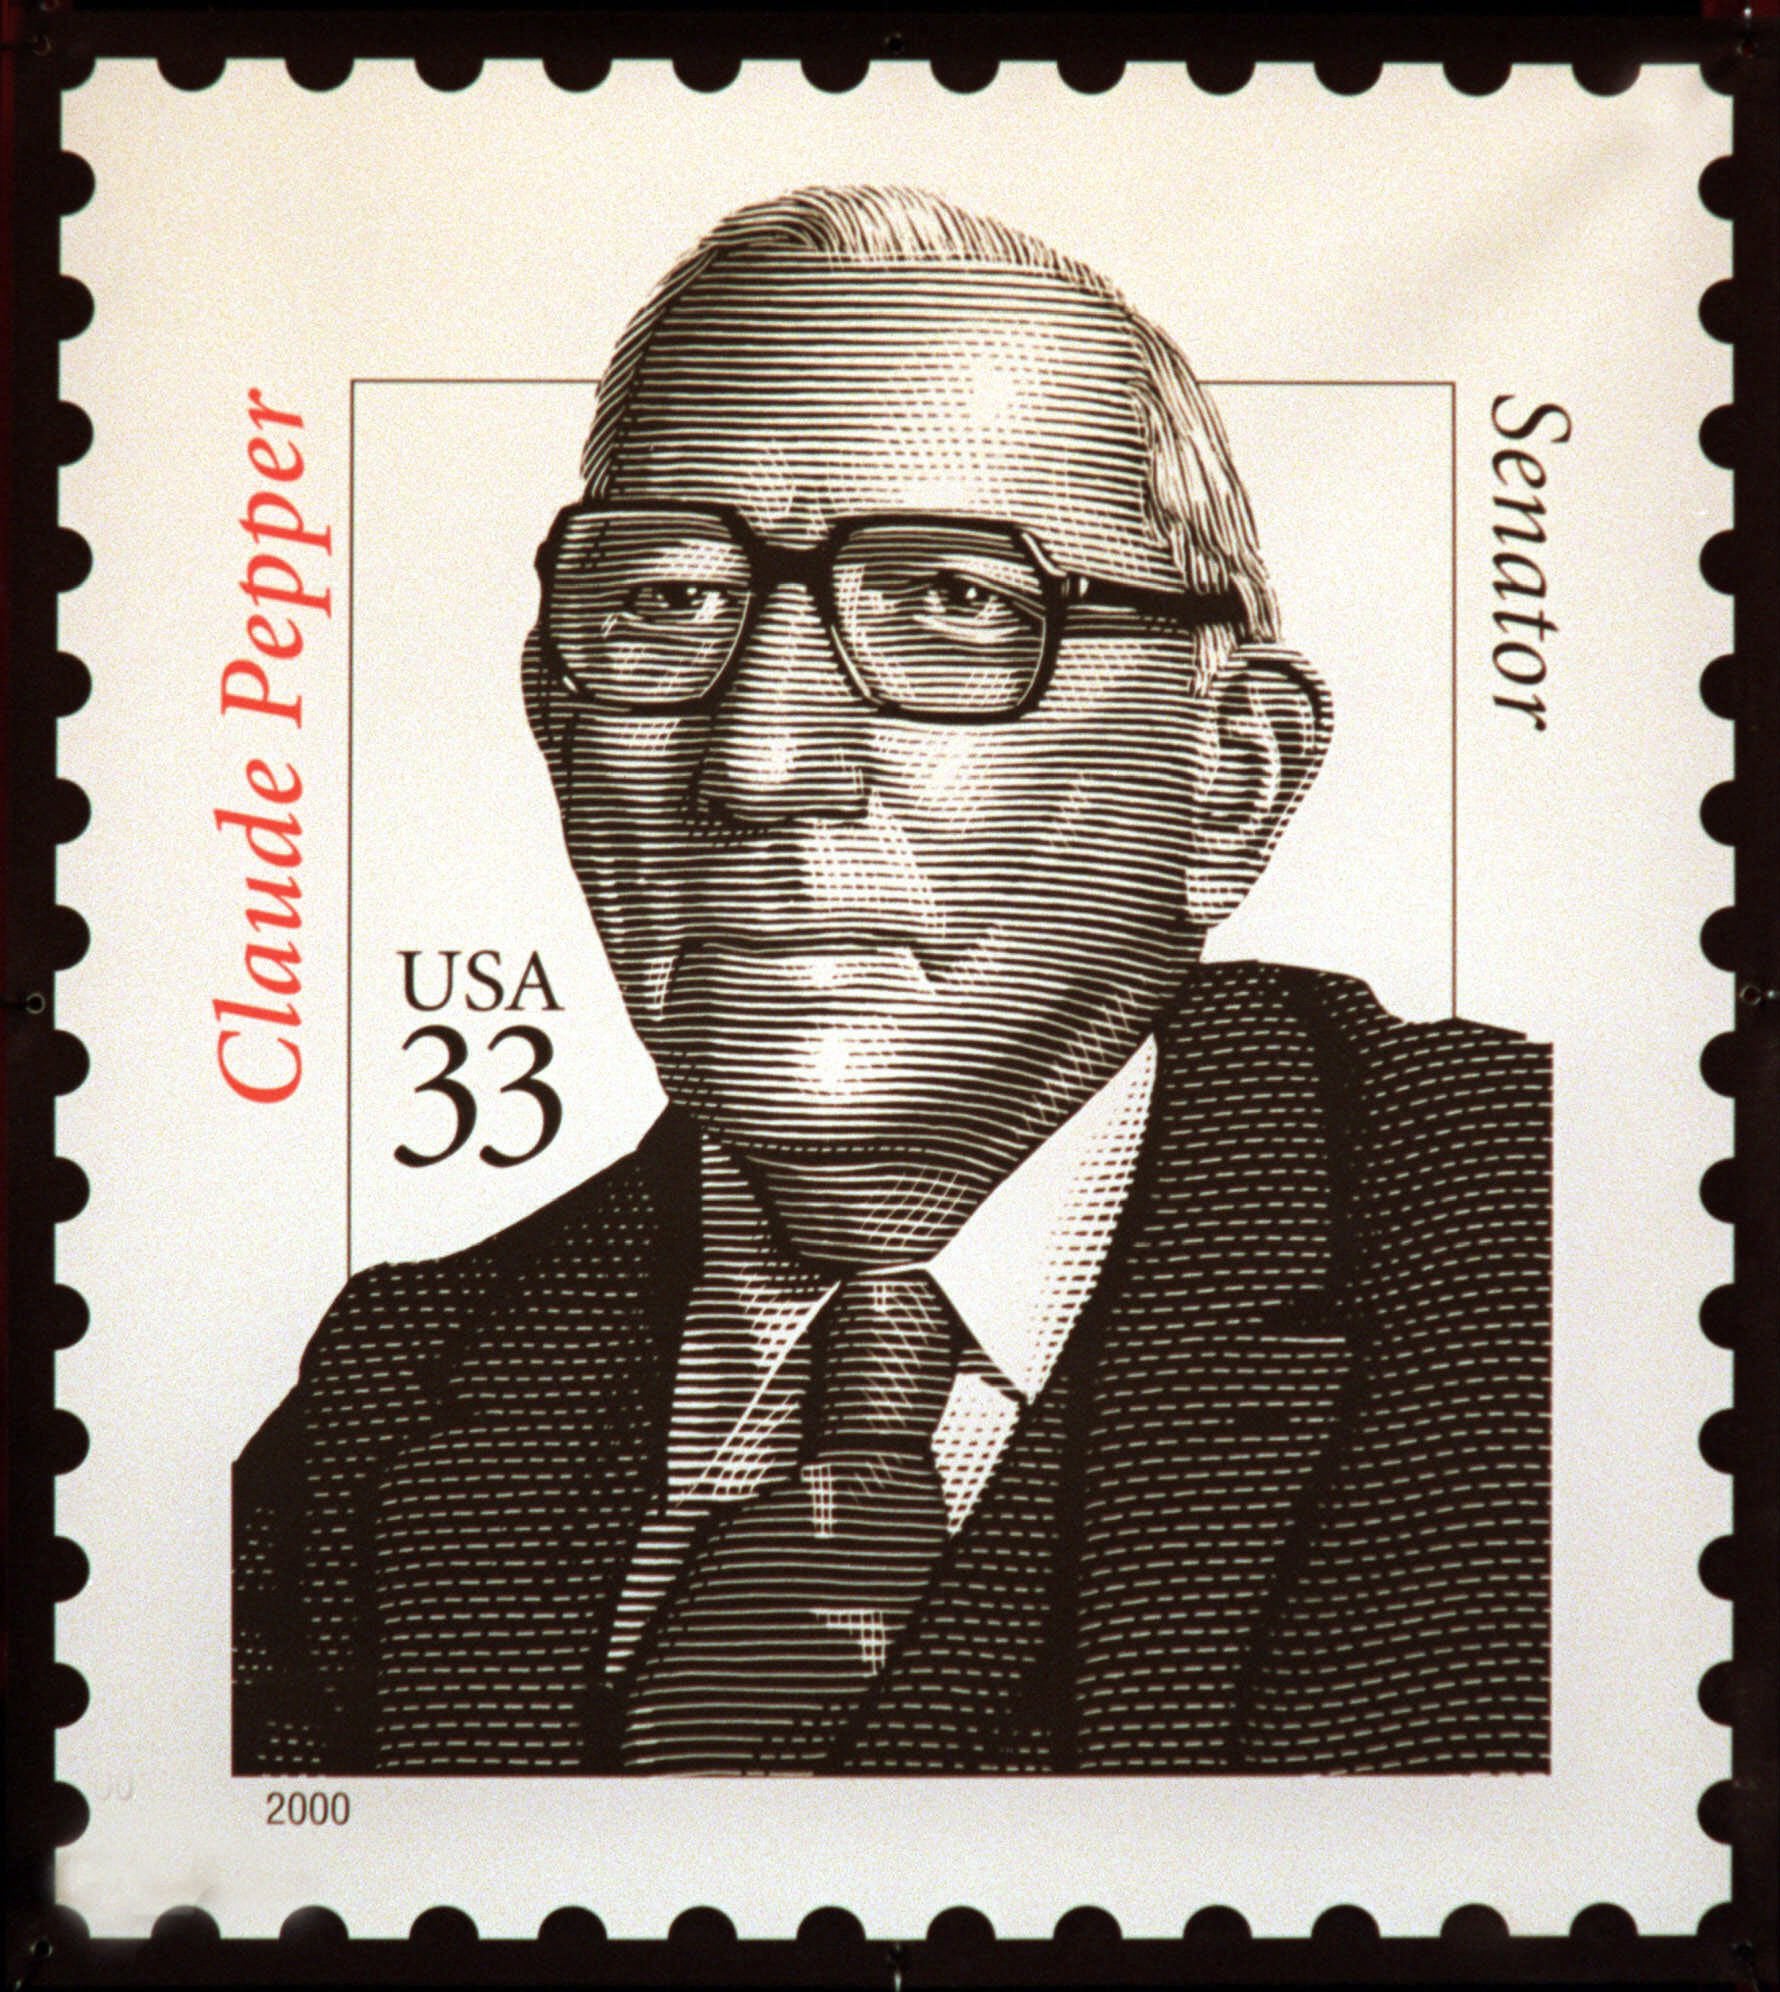 Claude Pepper on 33 cent stamp